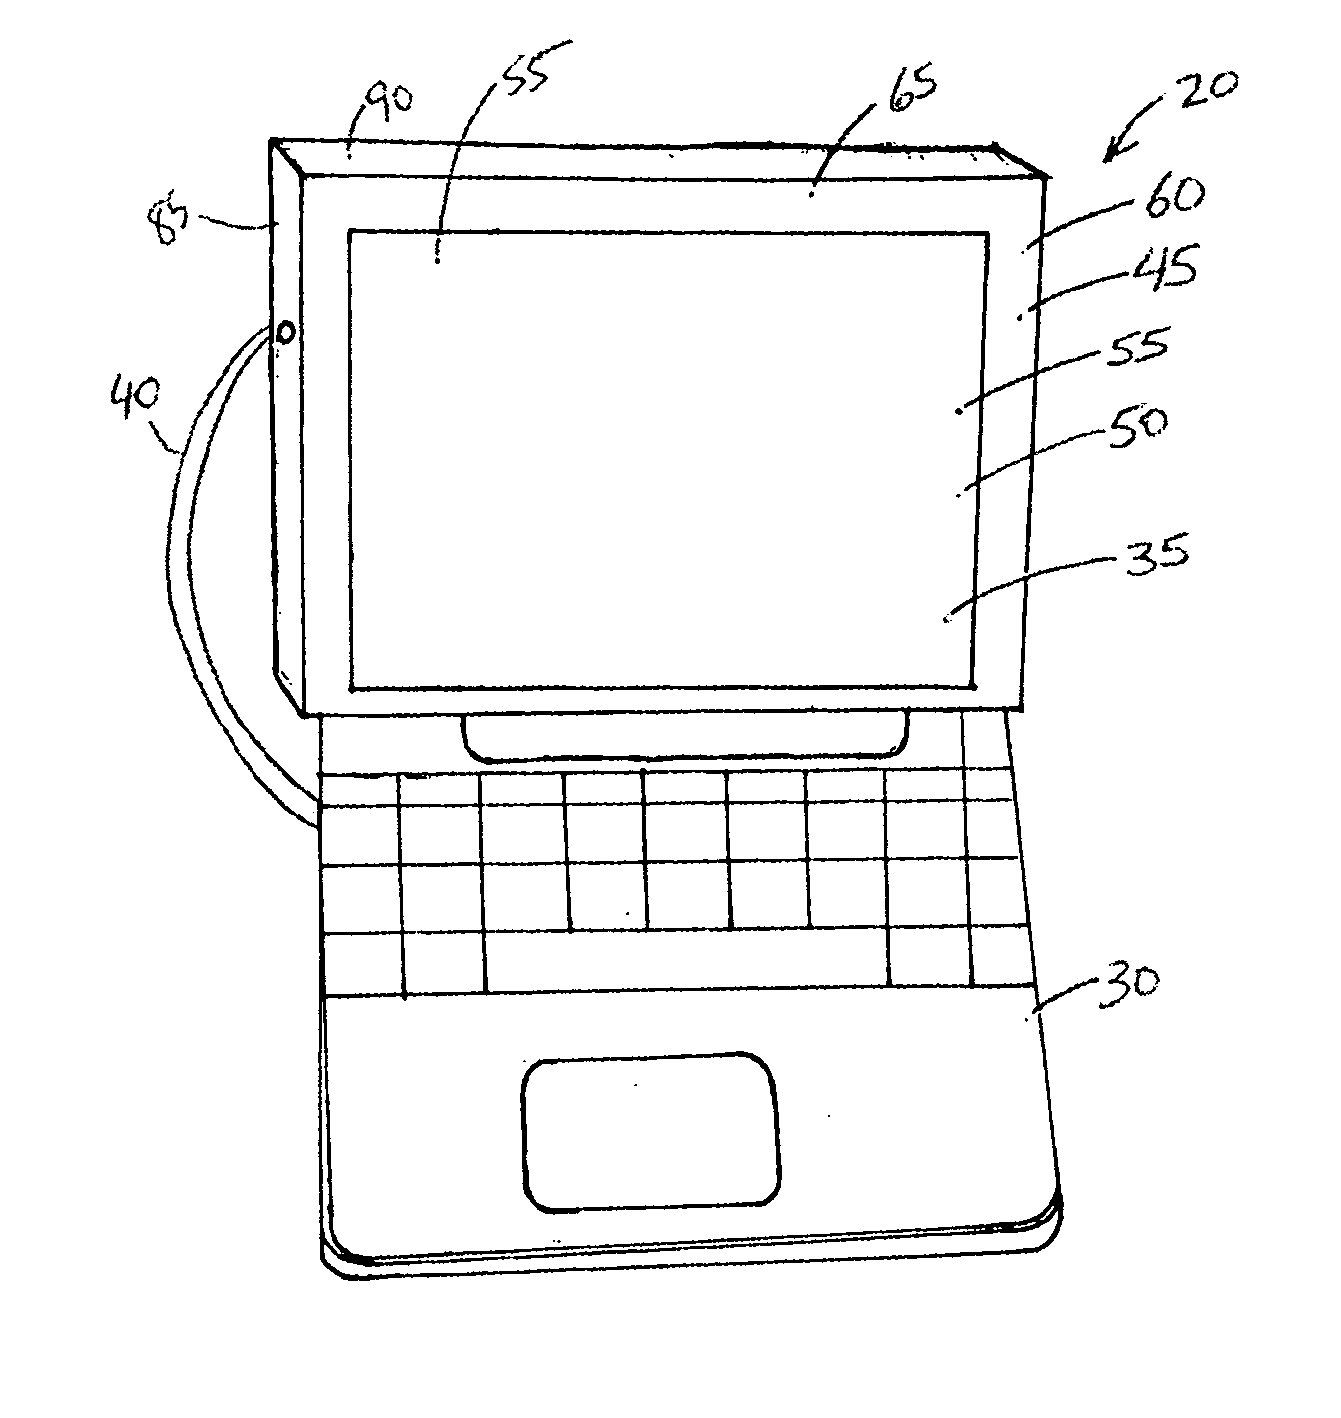 C-frame slidable touch input apparatus for displays of computing devices